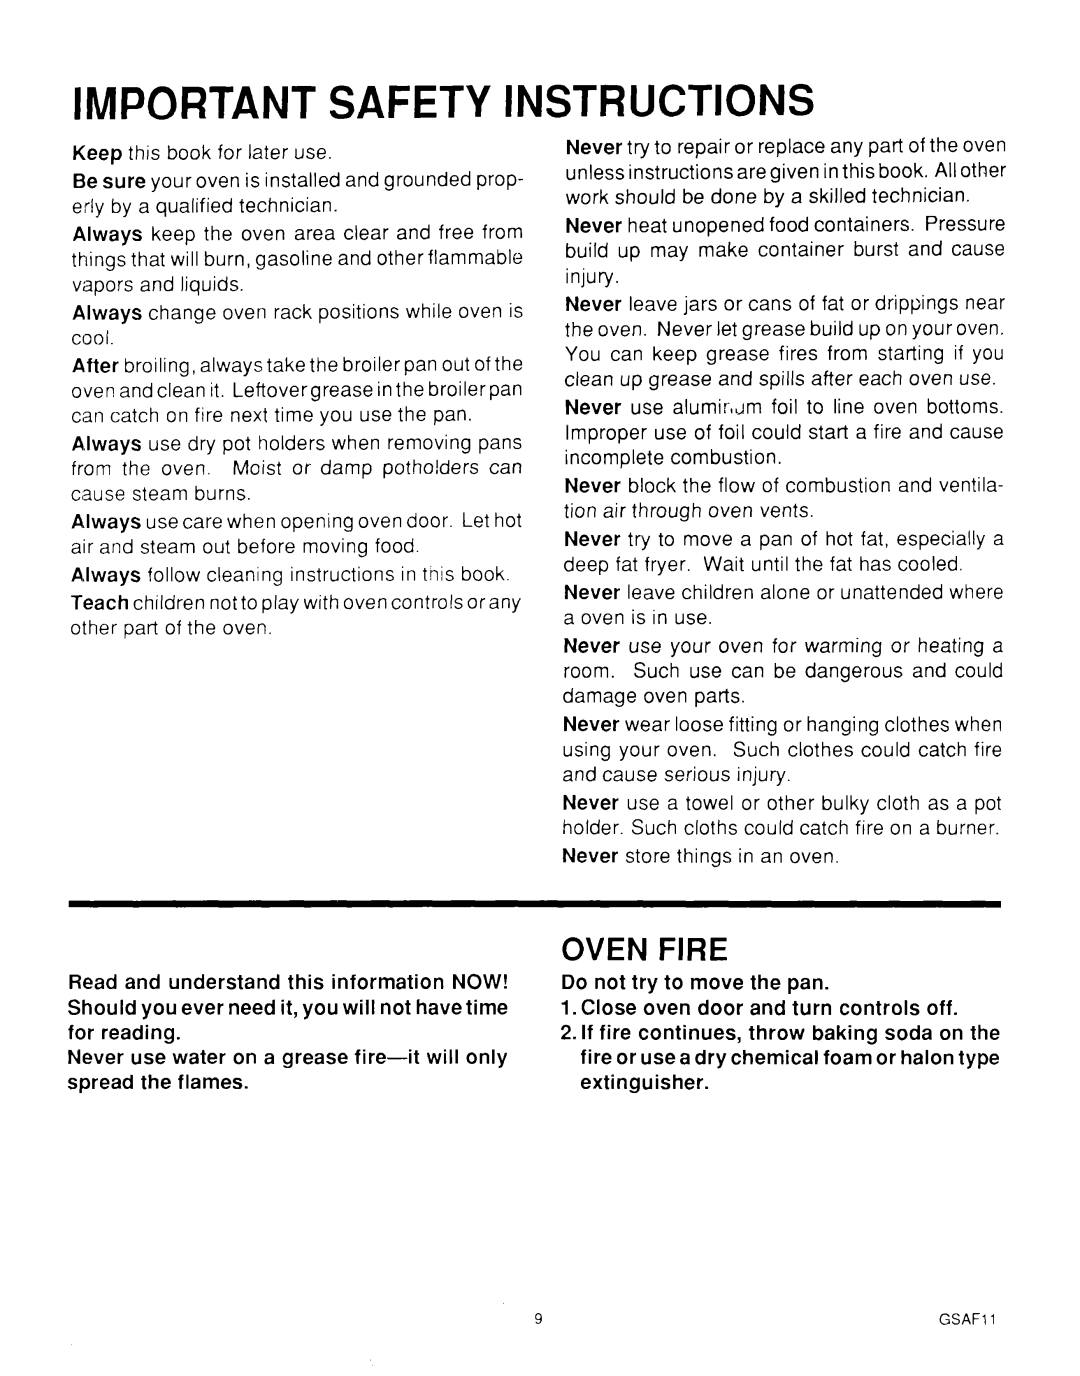 Roper MN11020(344197), B875 manual Important Safety Instructions, Oven Fire 